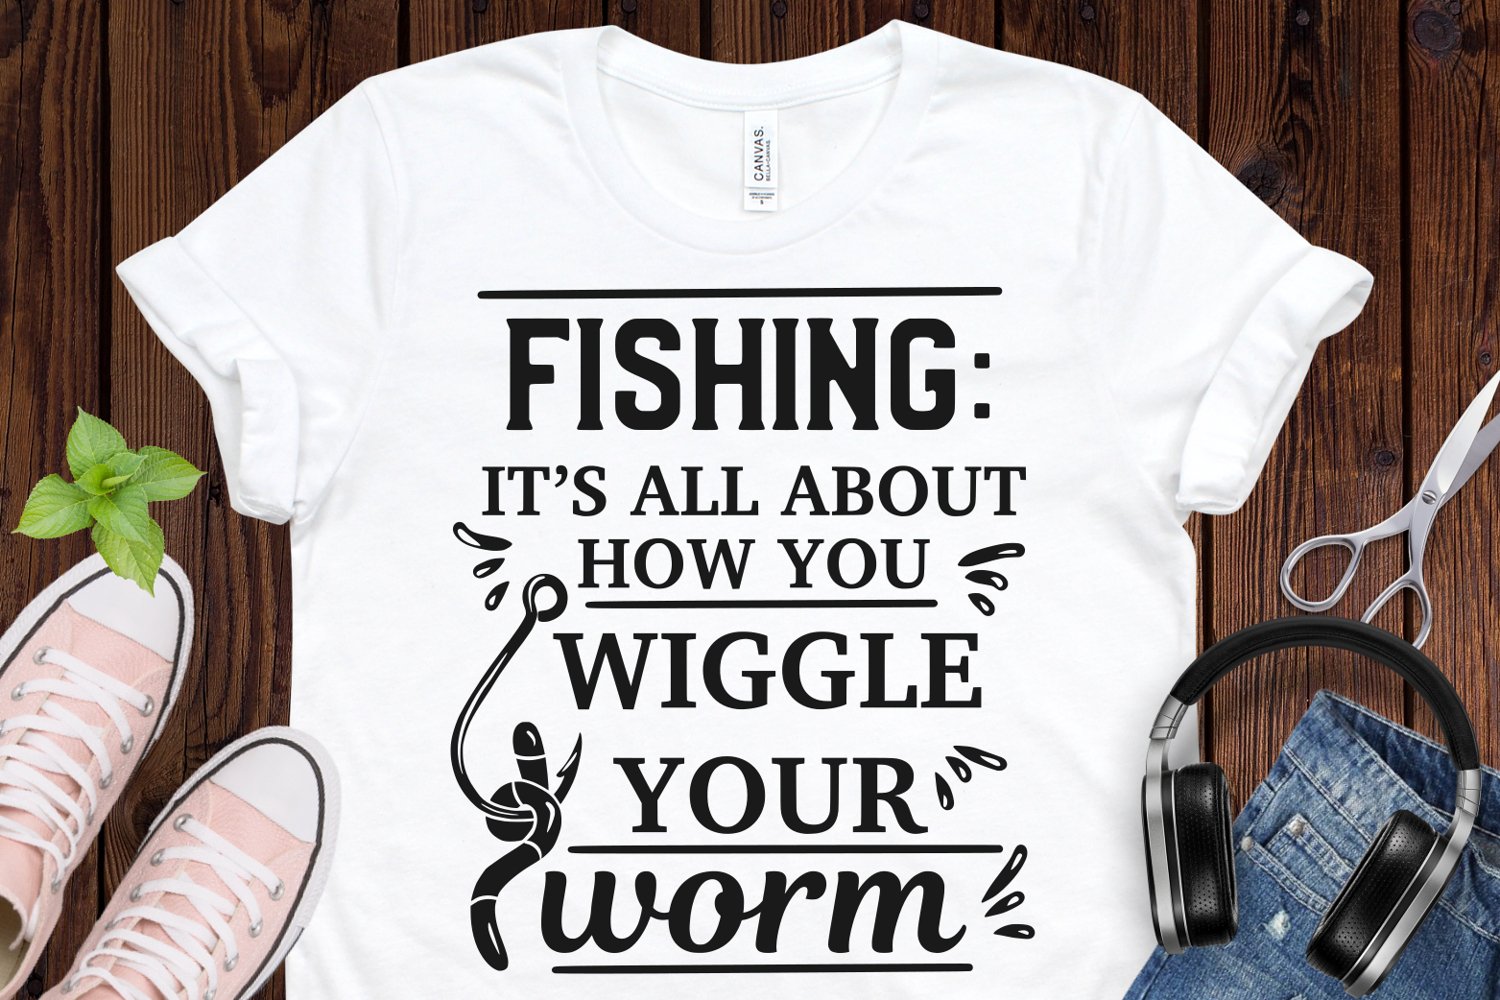 Fishing: it's all about how you wiggle your worm.